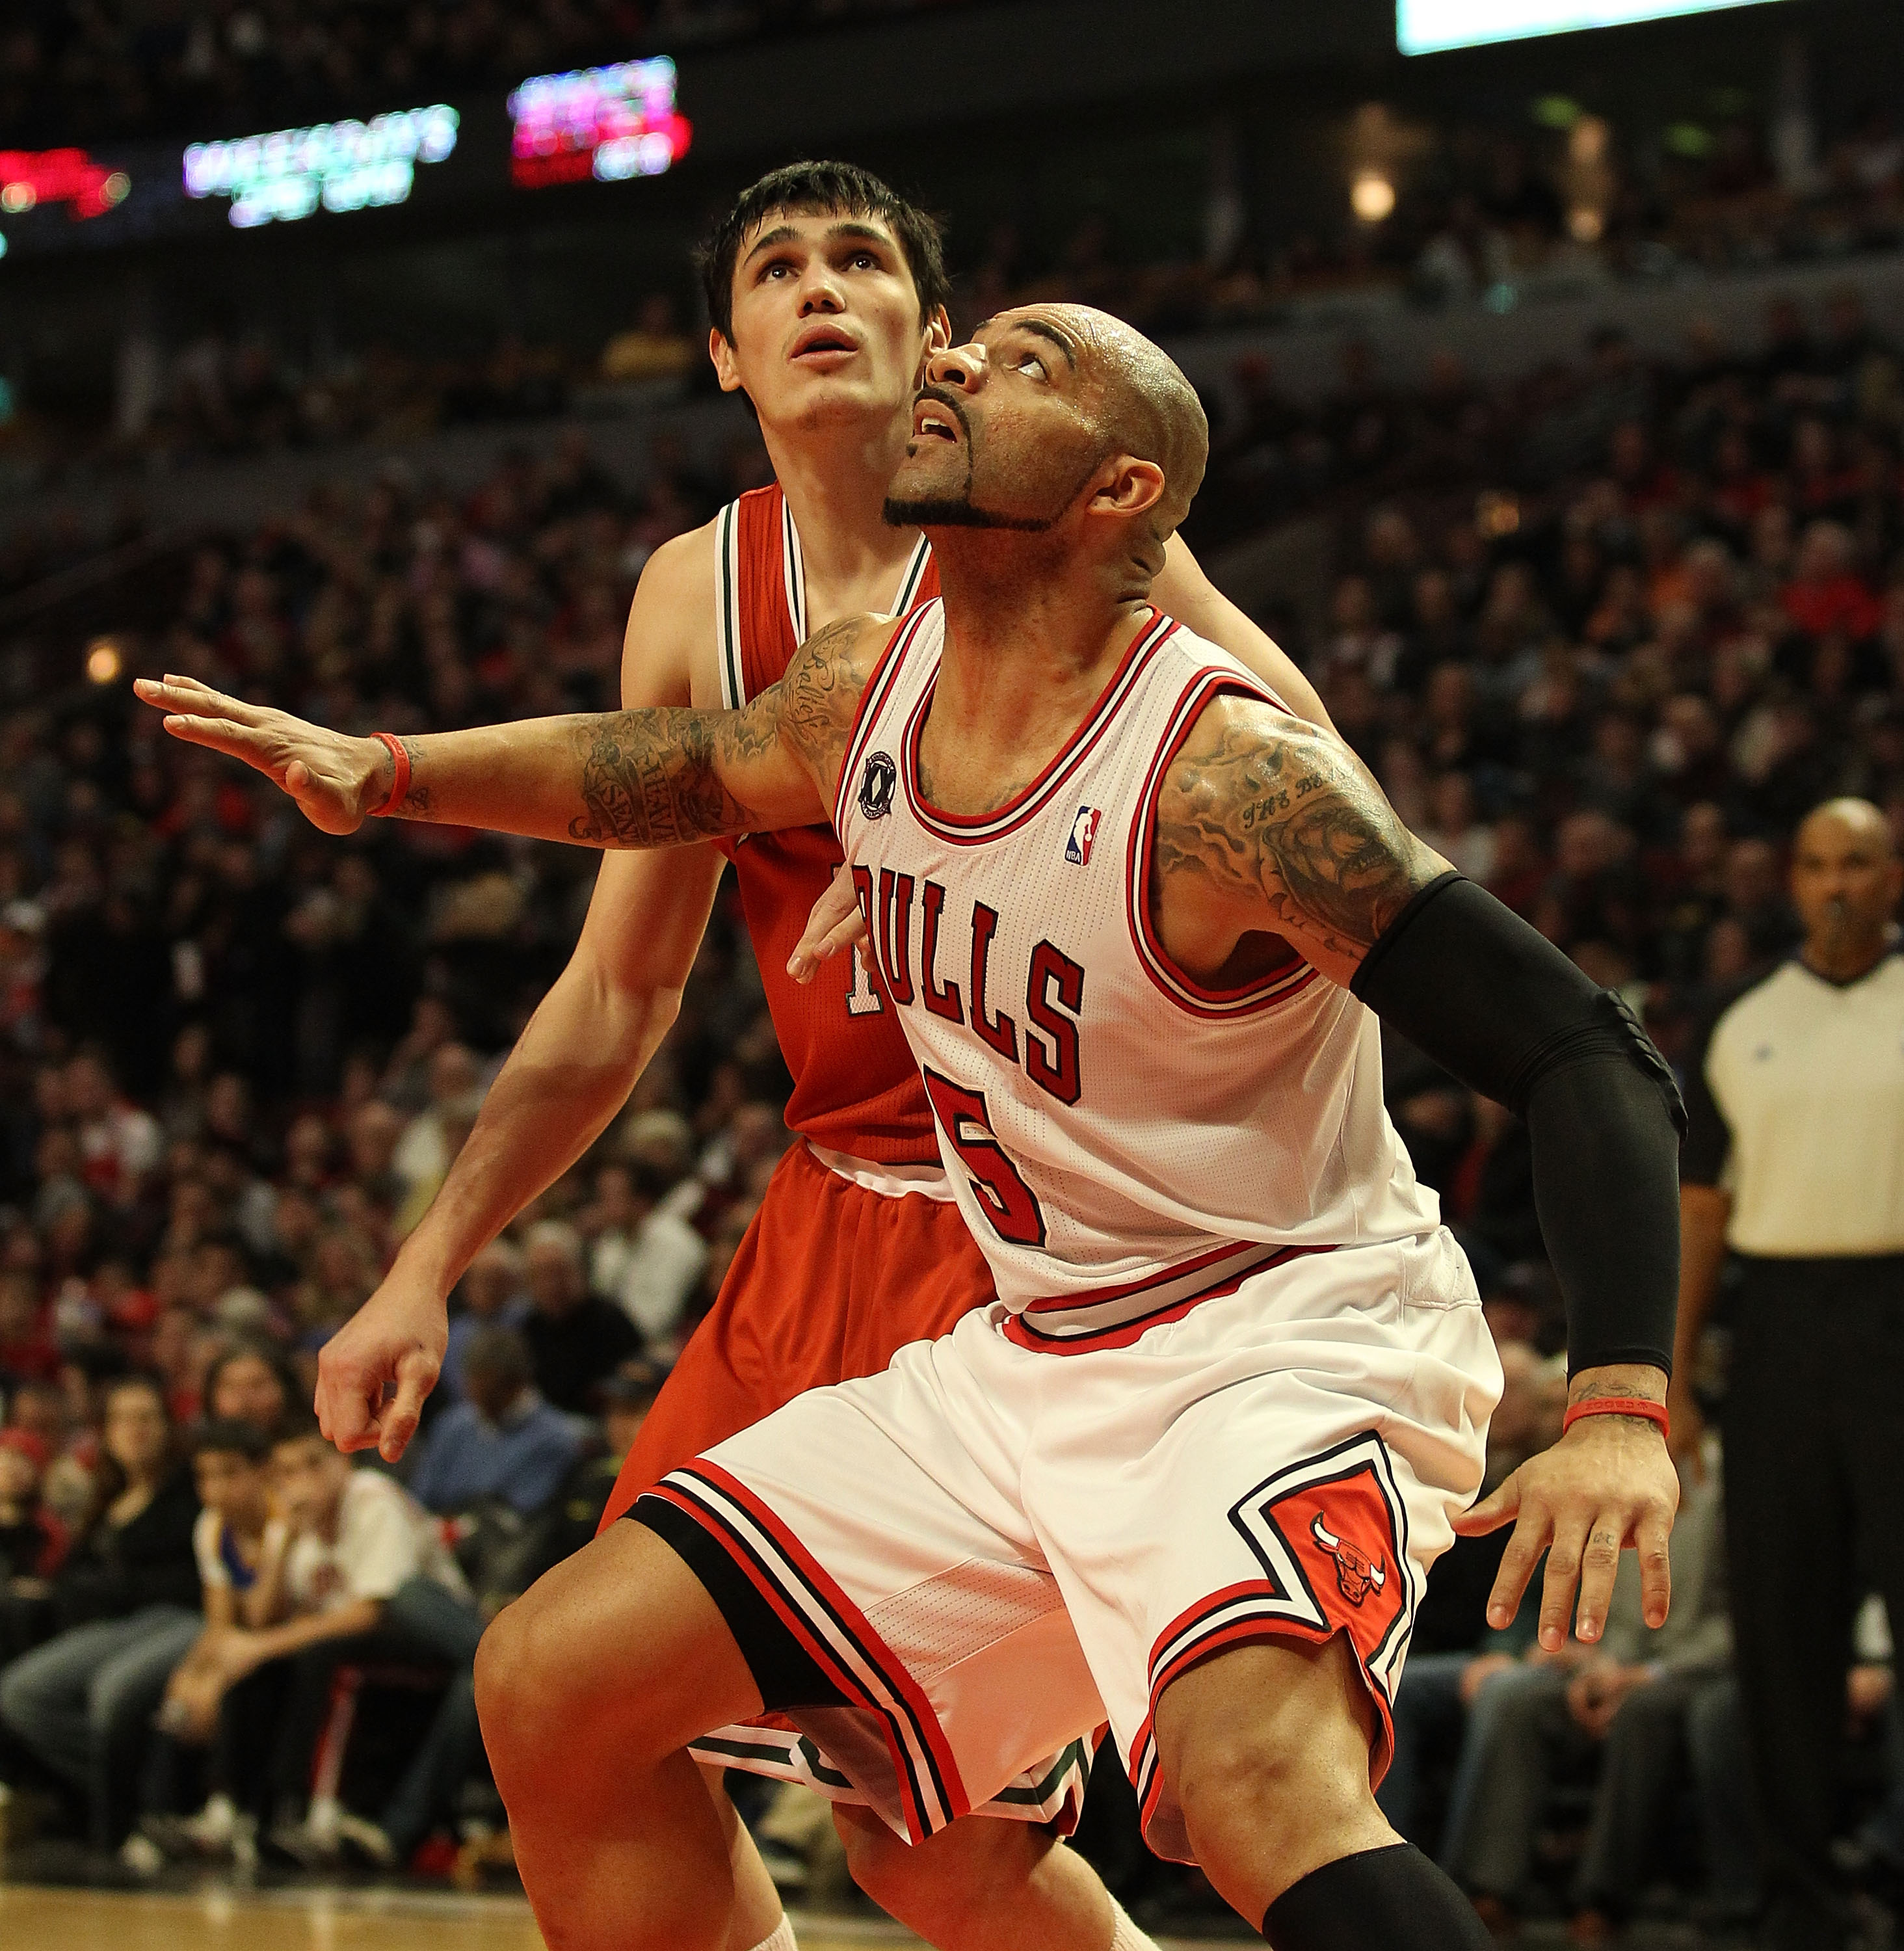 CHICAGO, IL - DECEMBER 28: Carlos Boozer #5 of the Chicago Bulls screens Ersan Ilyasova #7 of the Milwaukee Bucks at the United Center on December 28, 2010 in Chicago, Illinois. The Bulls defeated the Bucks 90-77. NOTE TO USER: User expressly acknowledges